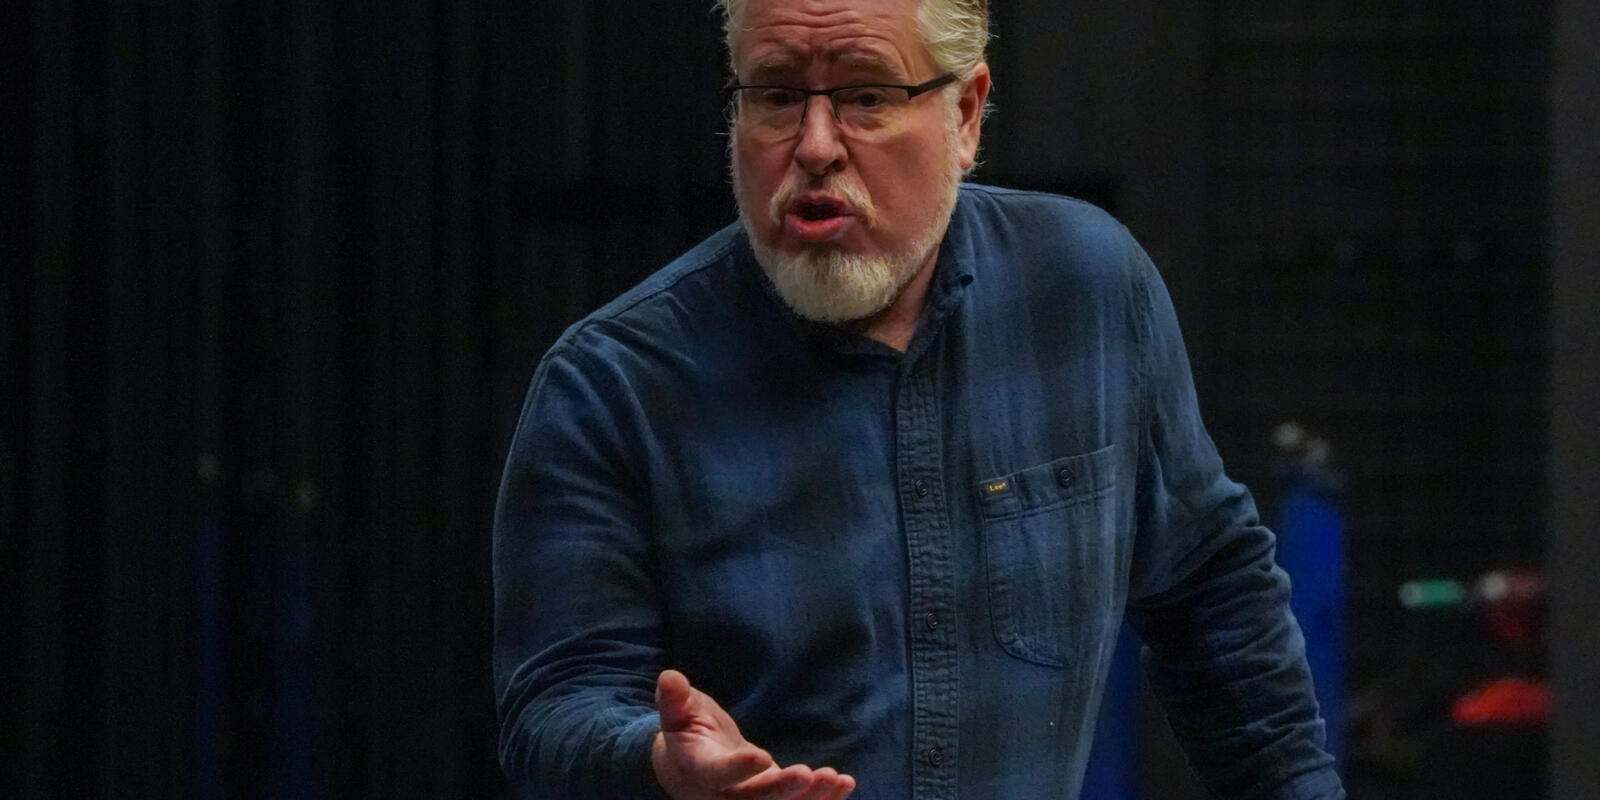 ENO The Rhinegold: James Creswell in rehearsals